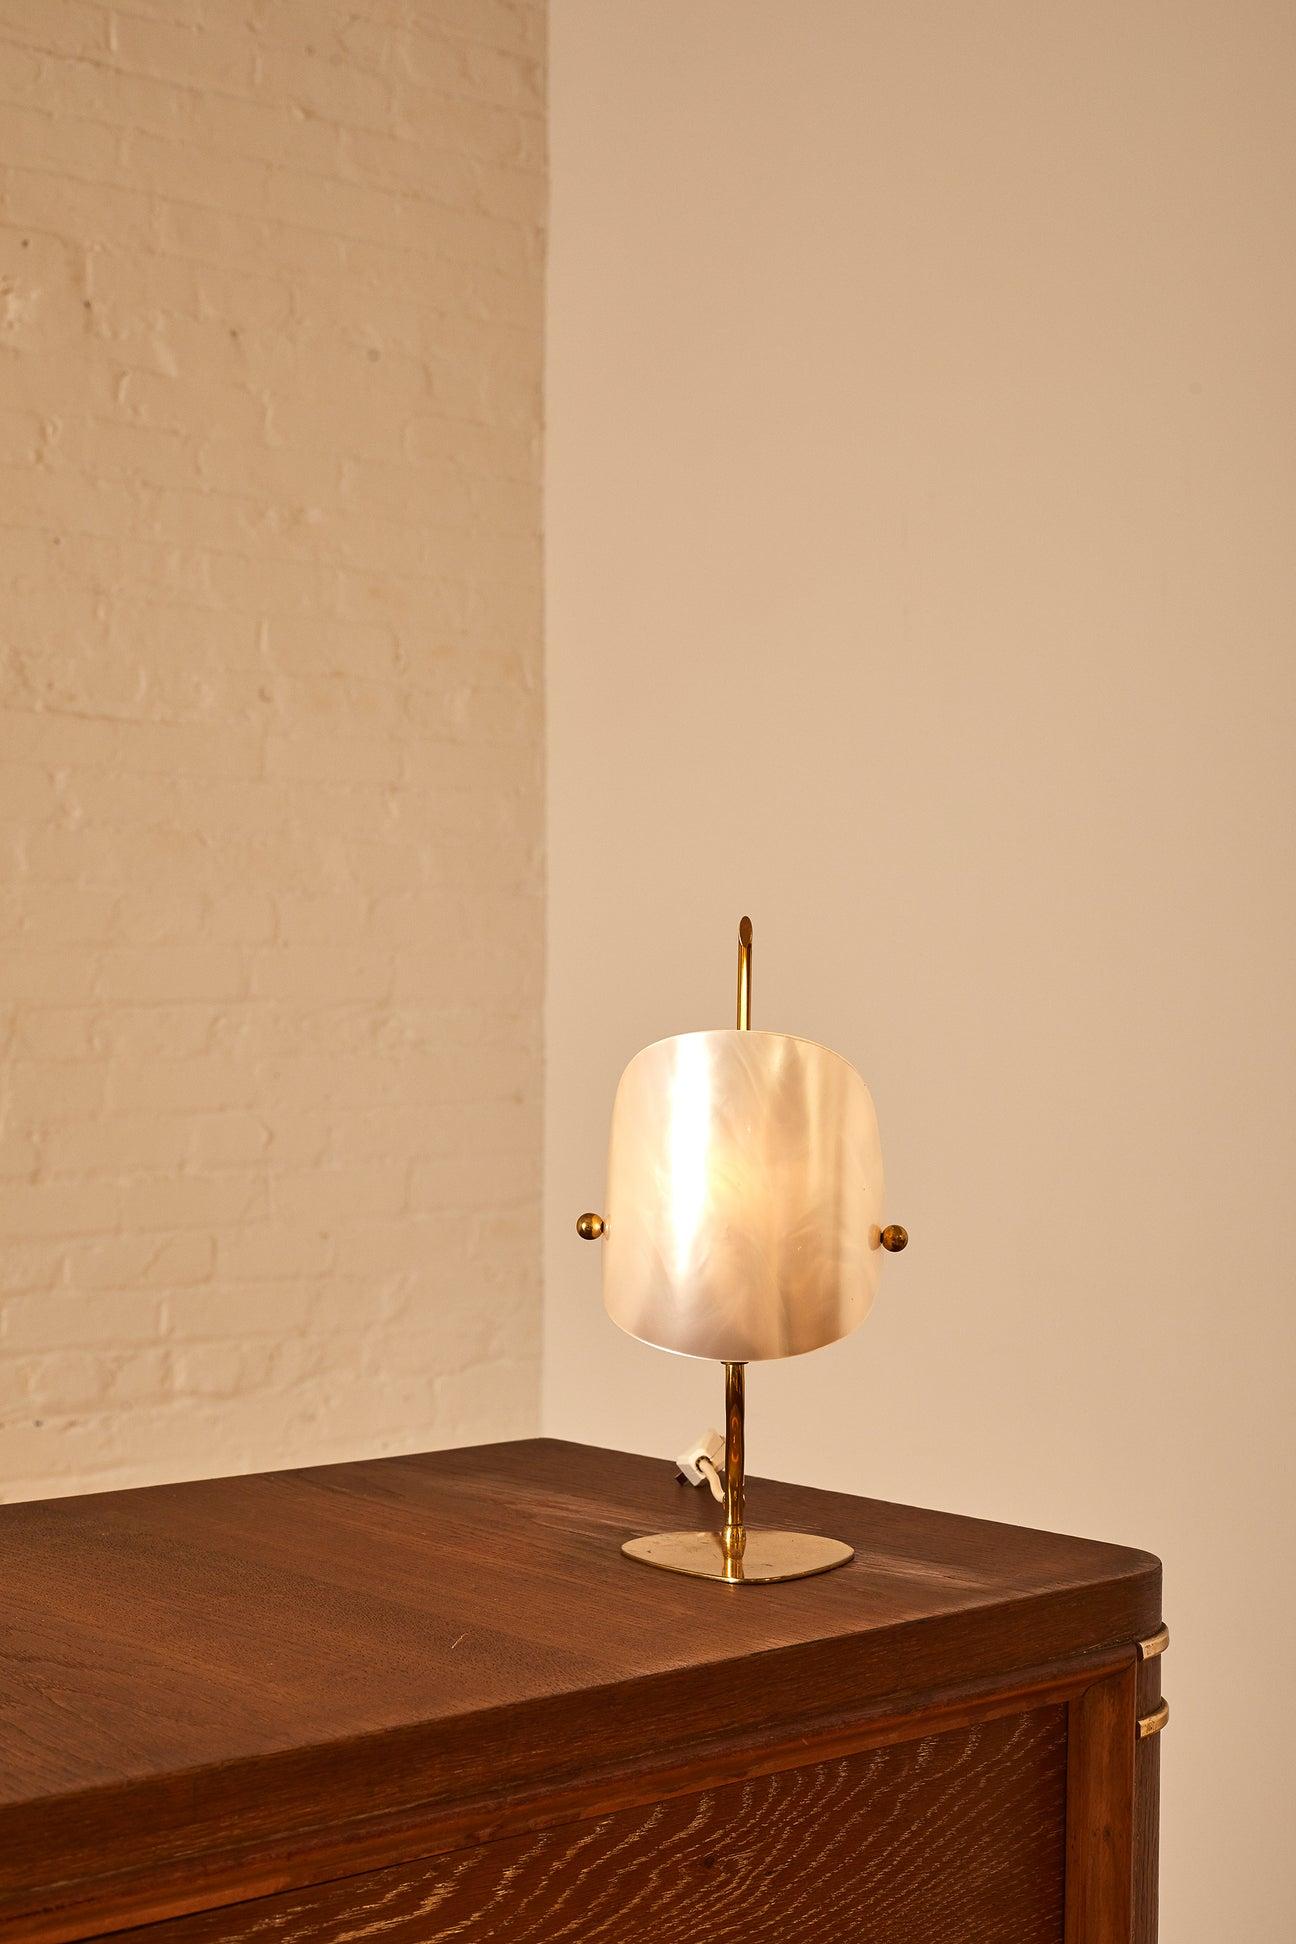 Italian modern miniature table lamp, featuring brass detailing and an opal shade.